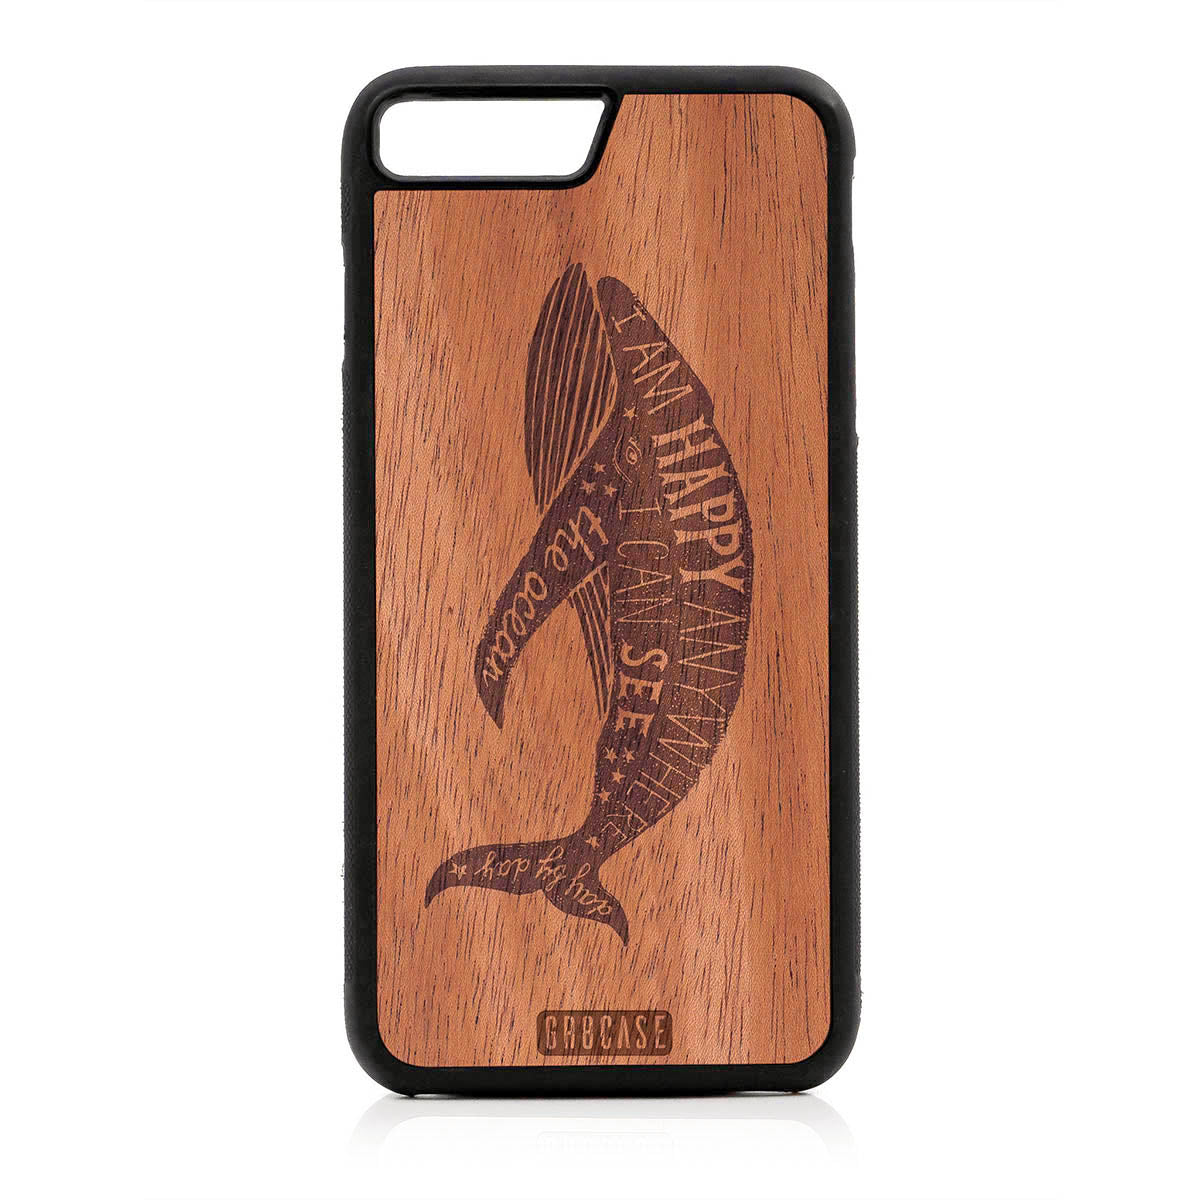 I'm Happy Anywhere I Can See The Ocean (Whale) Design Wood Case For iPhone 7 Plus / 8 Plus